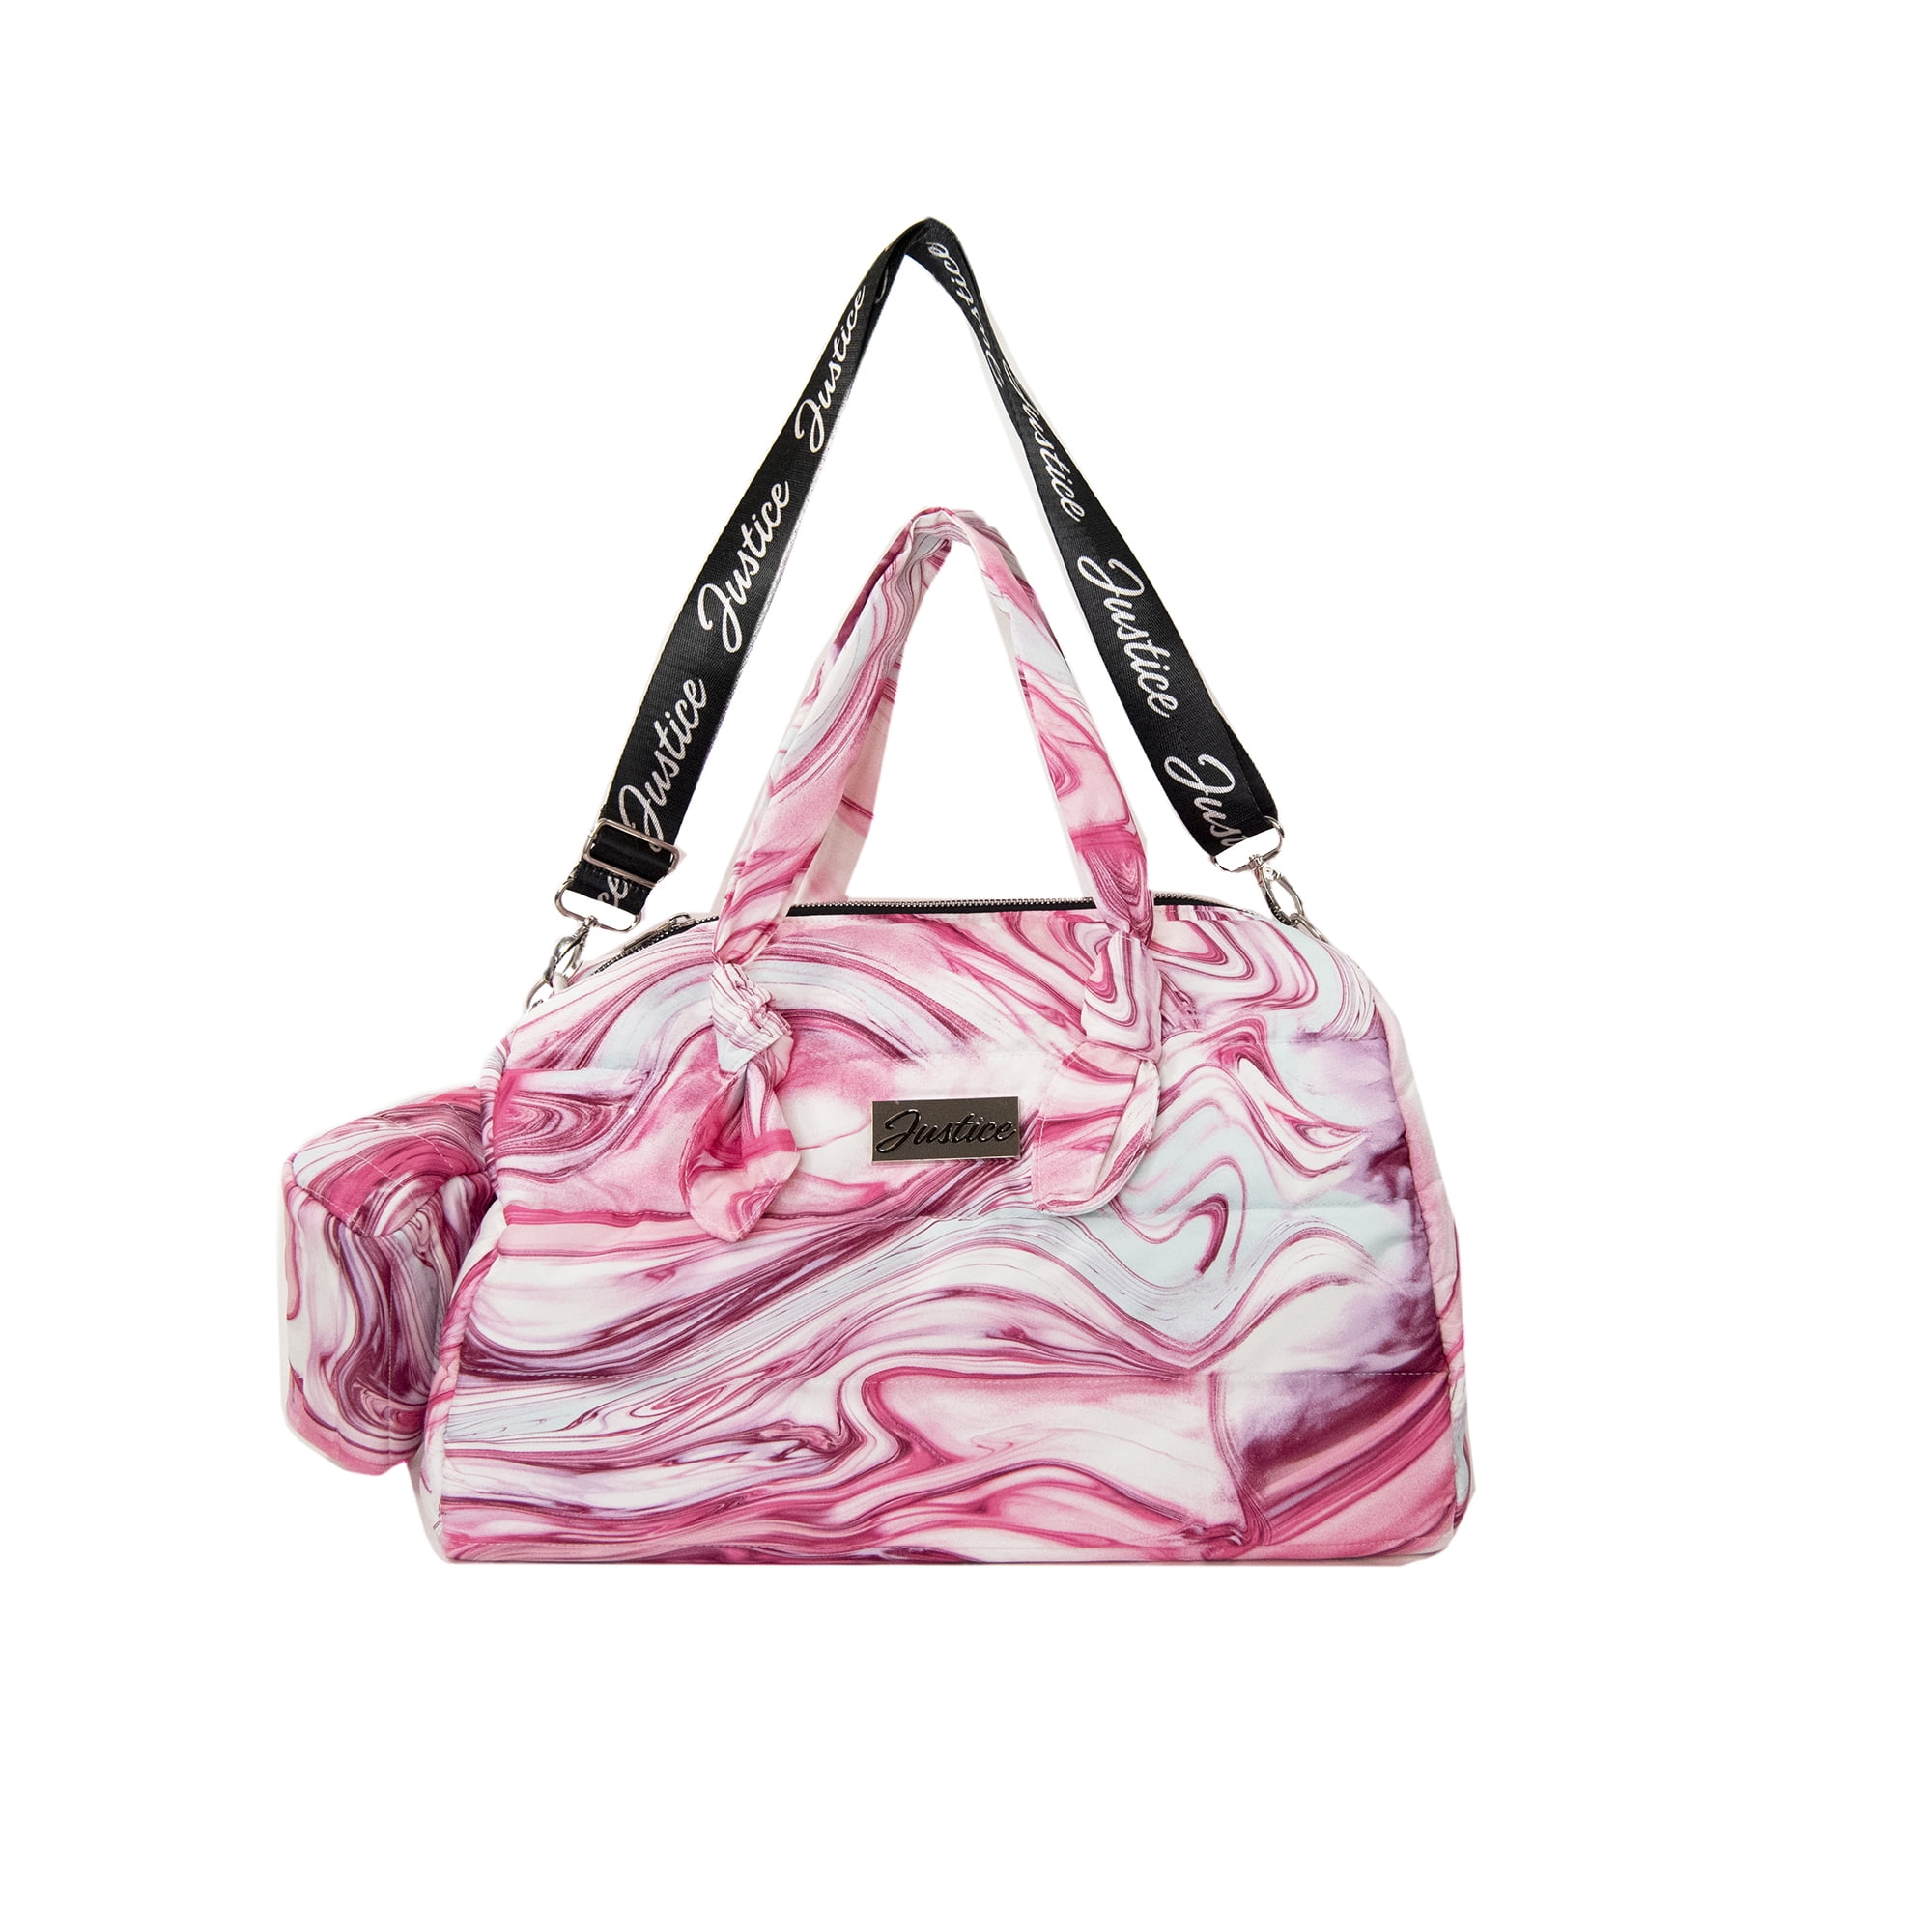 Justice Girls Pink Swirl Print Quilted Duffle Bag with Pouch, 2-Piece Set